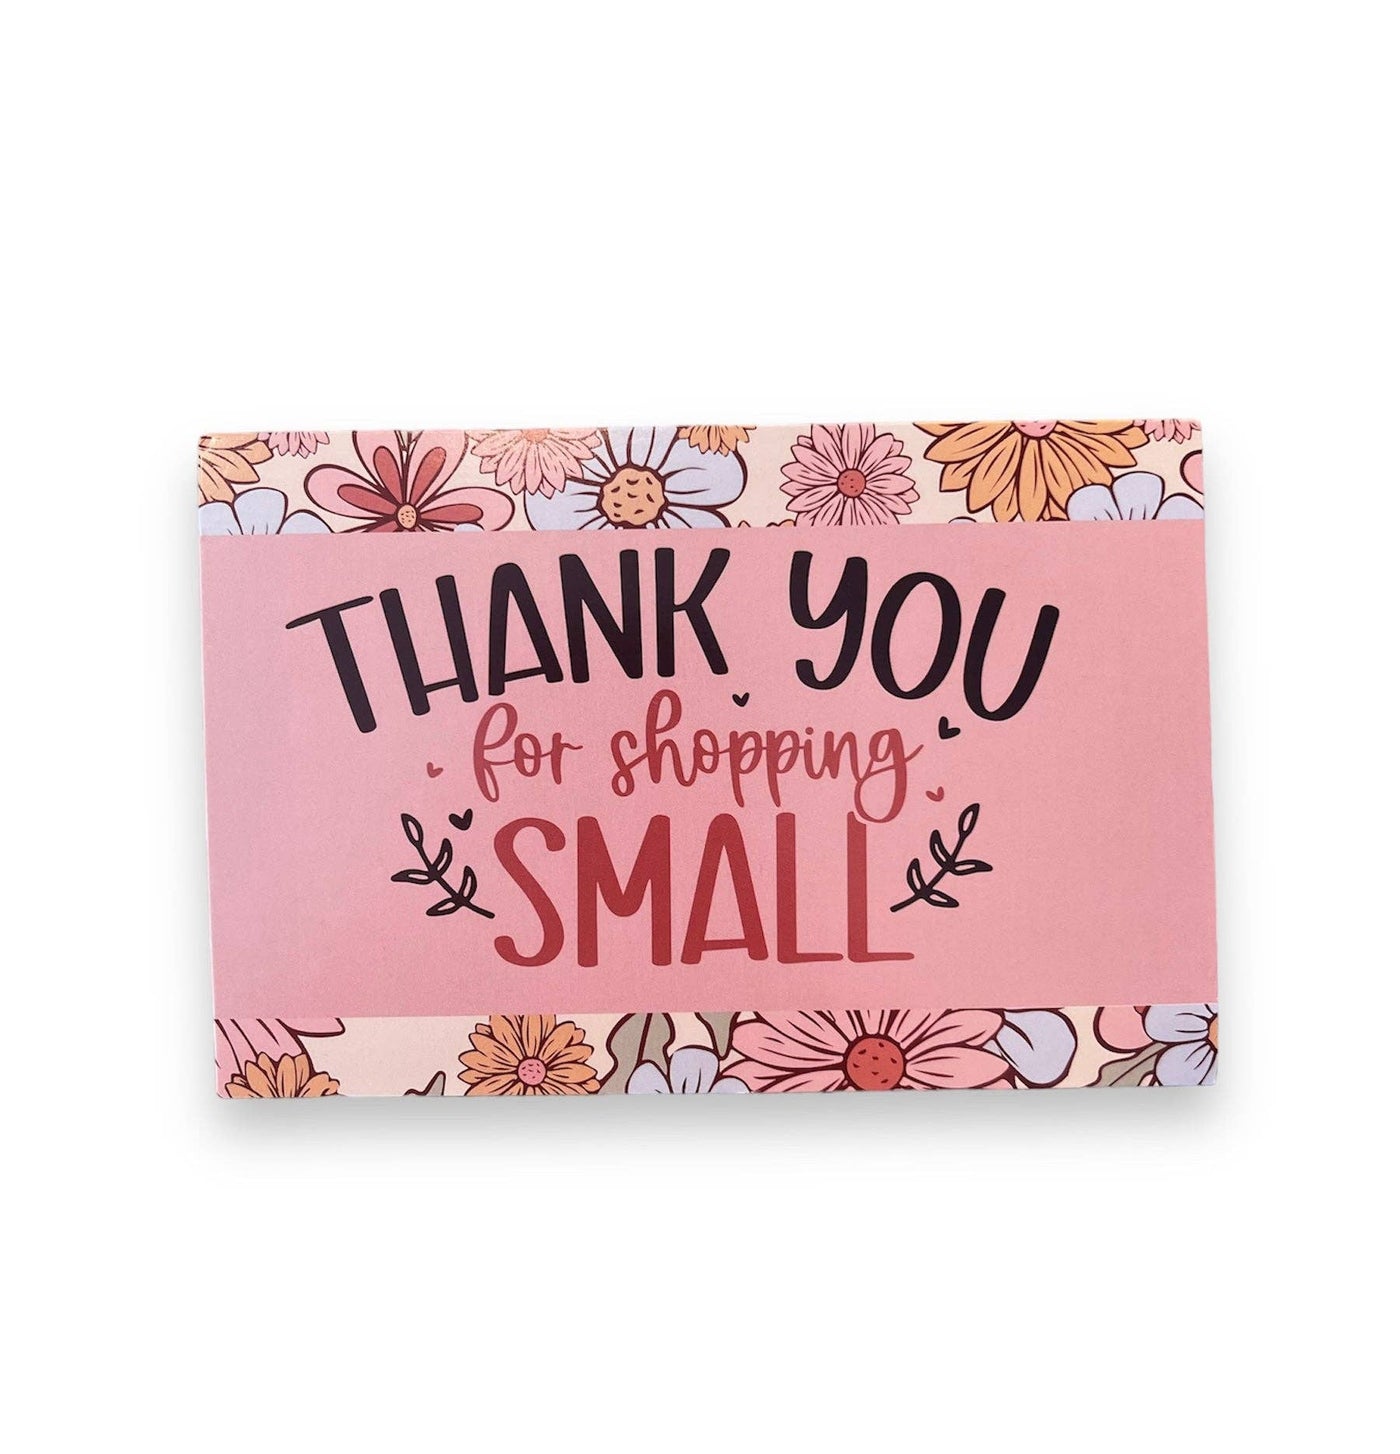 Thank You cards - Hello Summertime: 200 pack